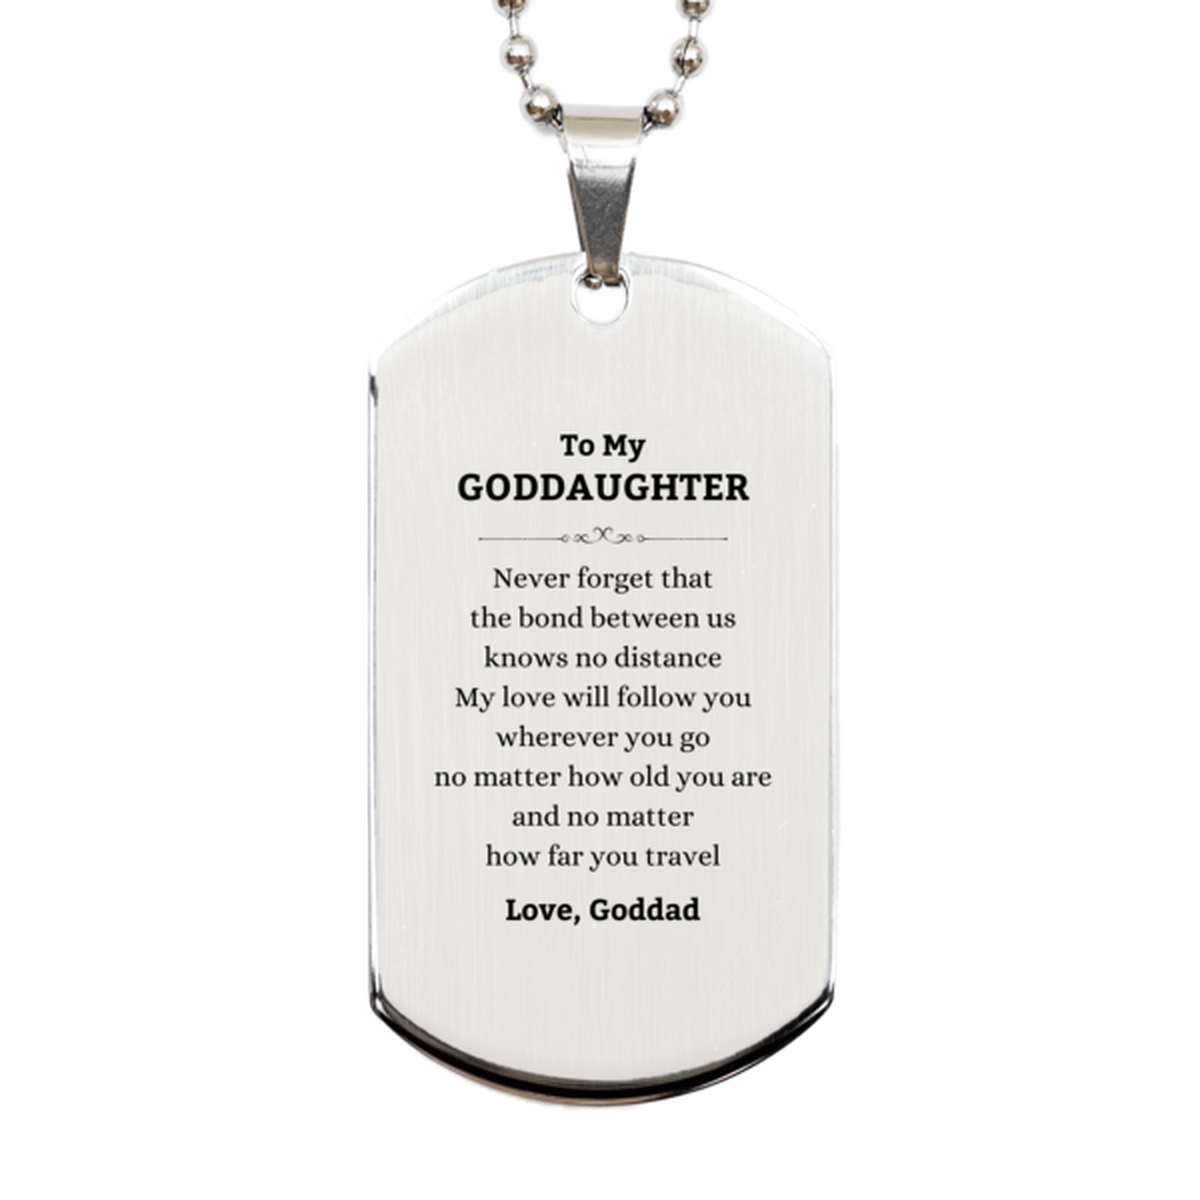 Goddaughter Birthday Gifts from Goddad, Adjustable Silver Dog Tag for Goddaughter Christmas Graduation Unique Gifts Goddaughter Never forget that the bond between us knows no distance. Love, Goddad